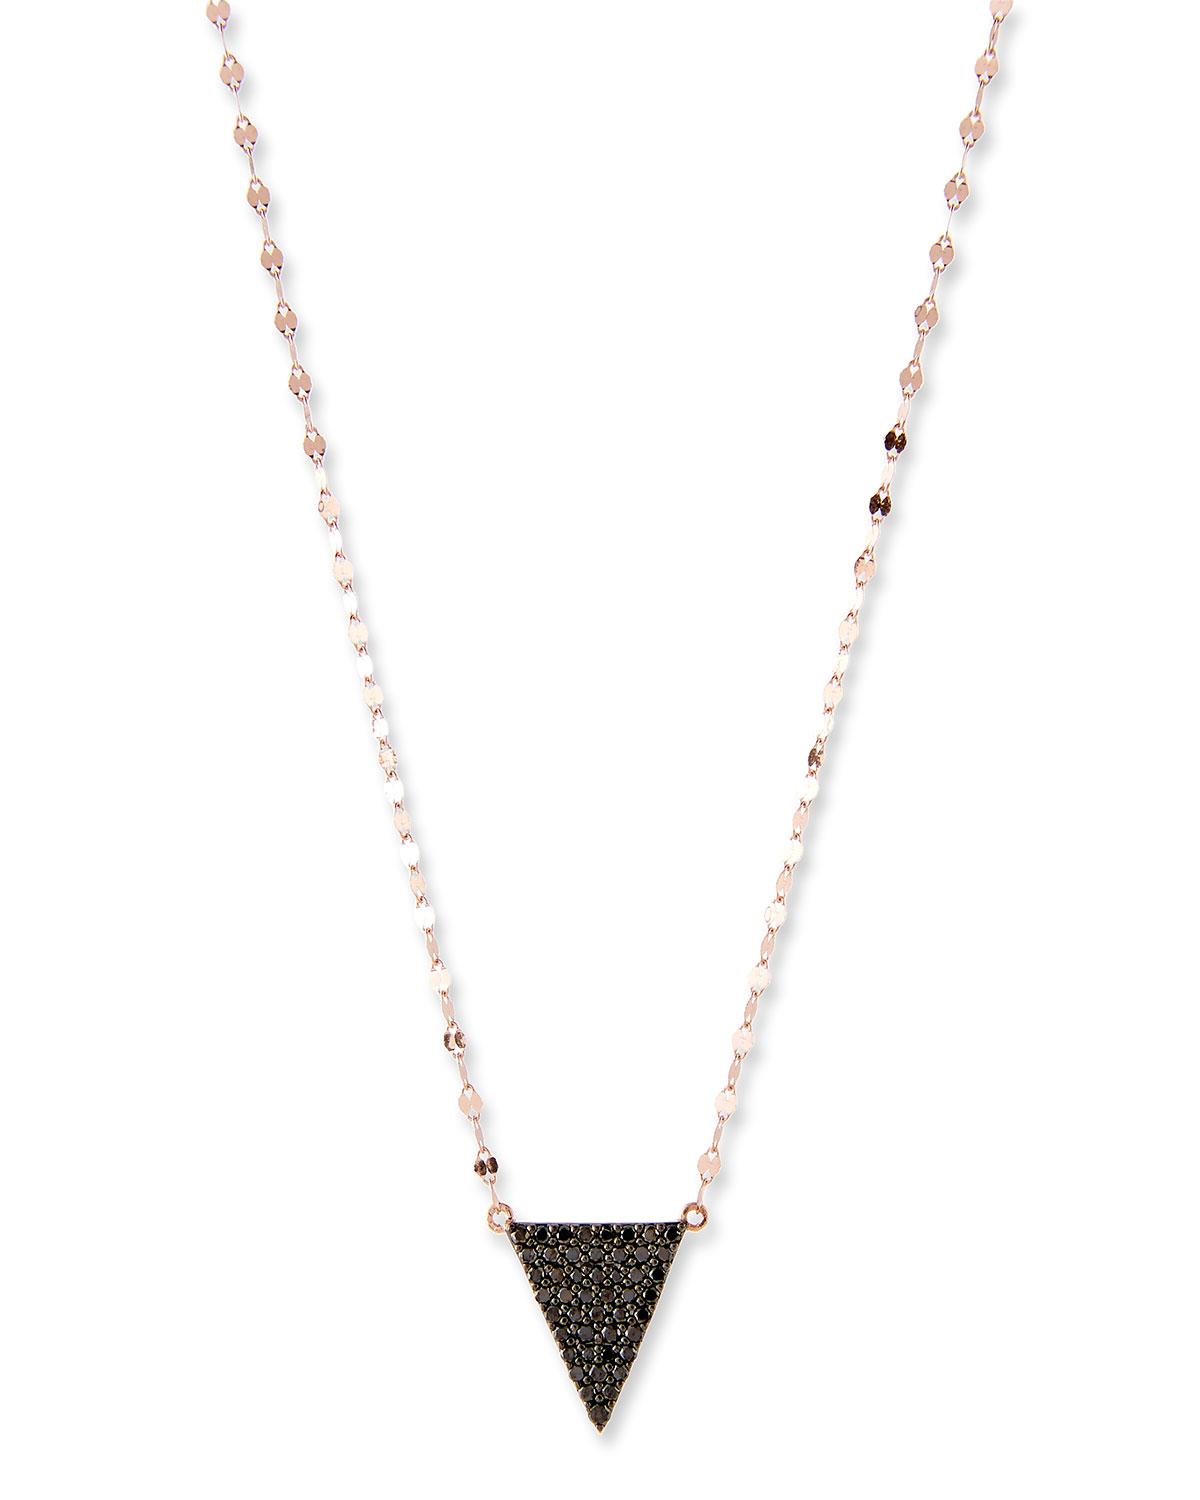 Lana jewelry Reckless Black Diamond Triangle Necklace In 14k Rose Gold